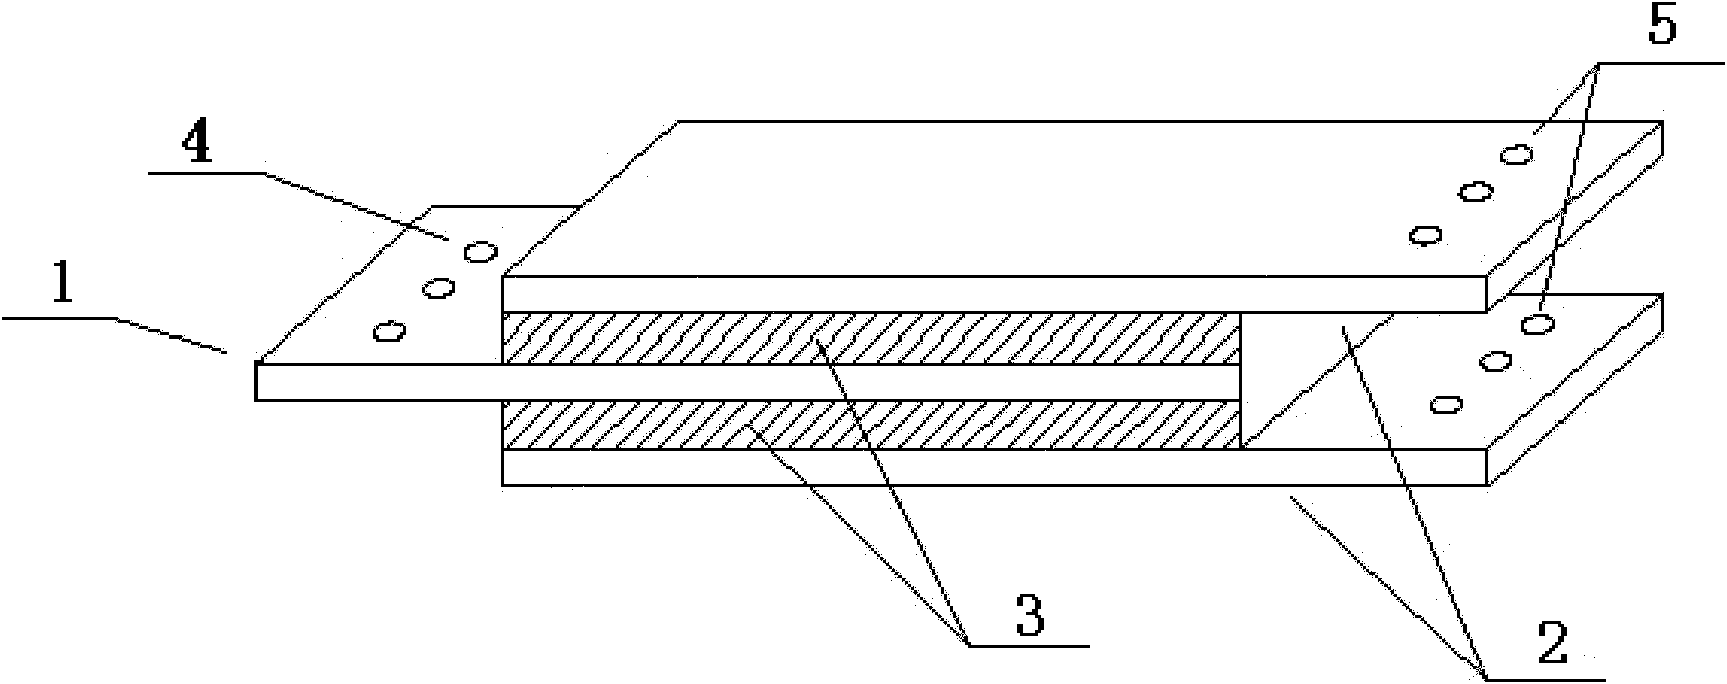 High-damping rubber fluid viscoelastic damper and manufacturing method thereof